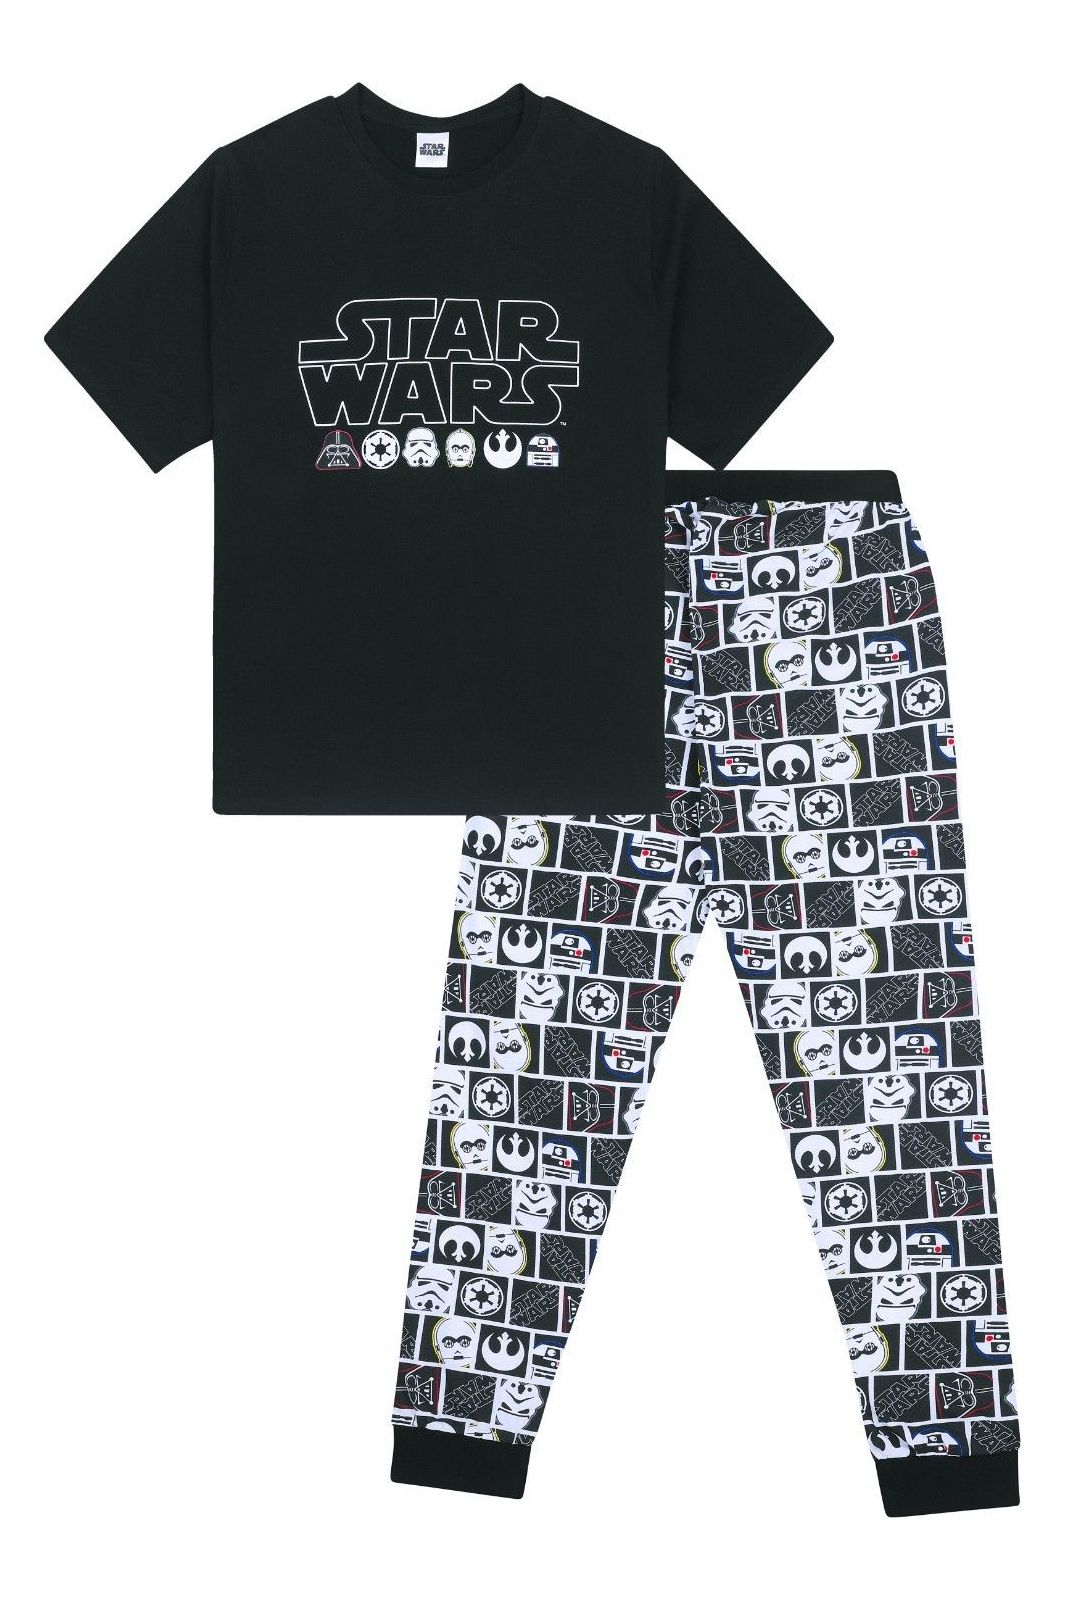 Star Wars top and bottoms set